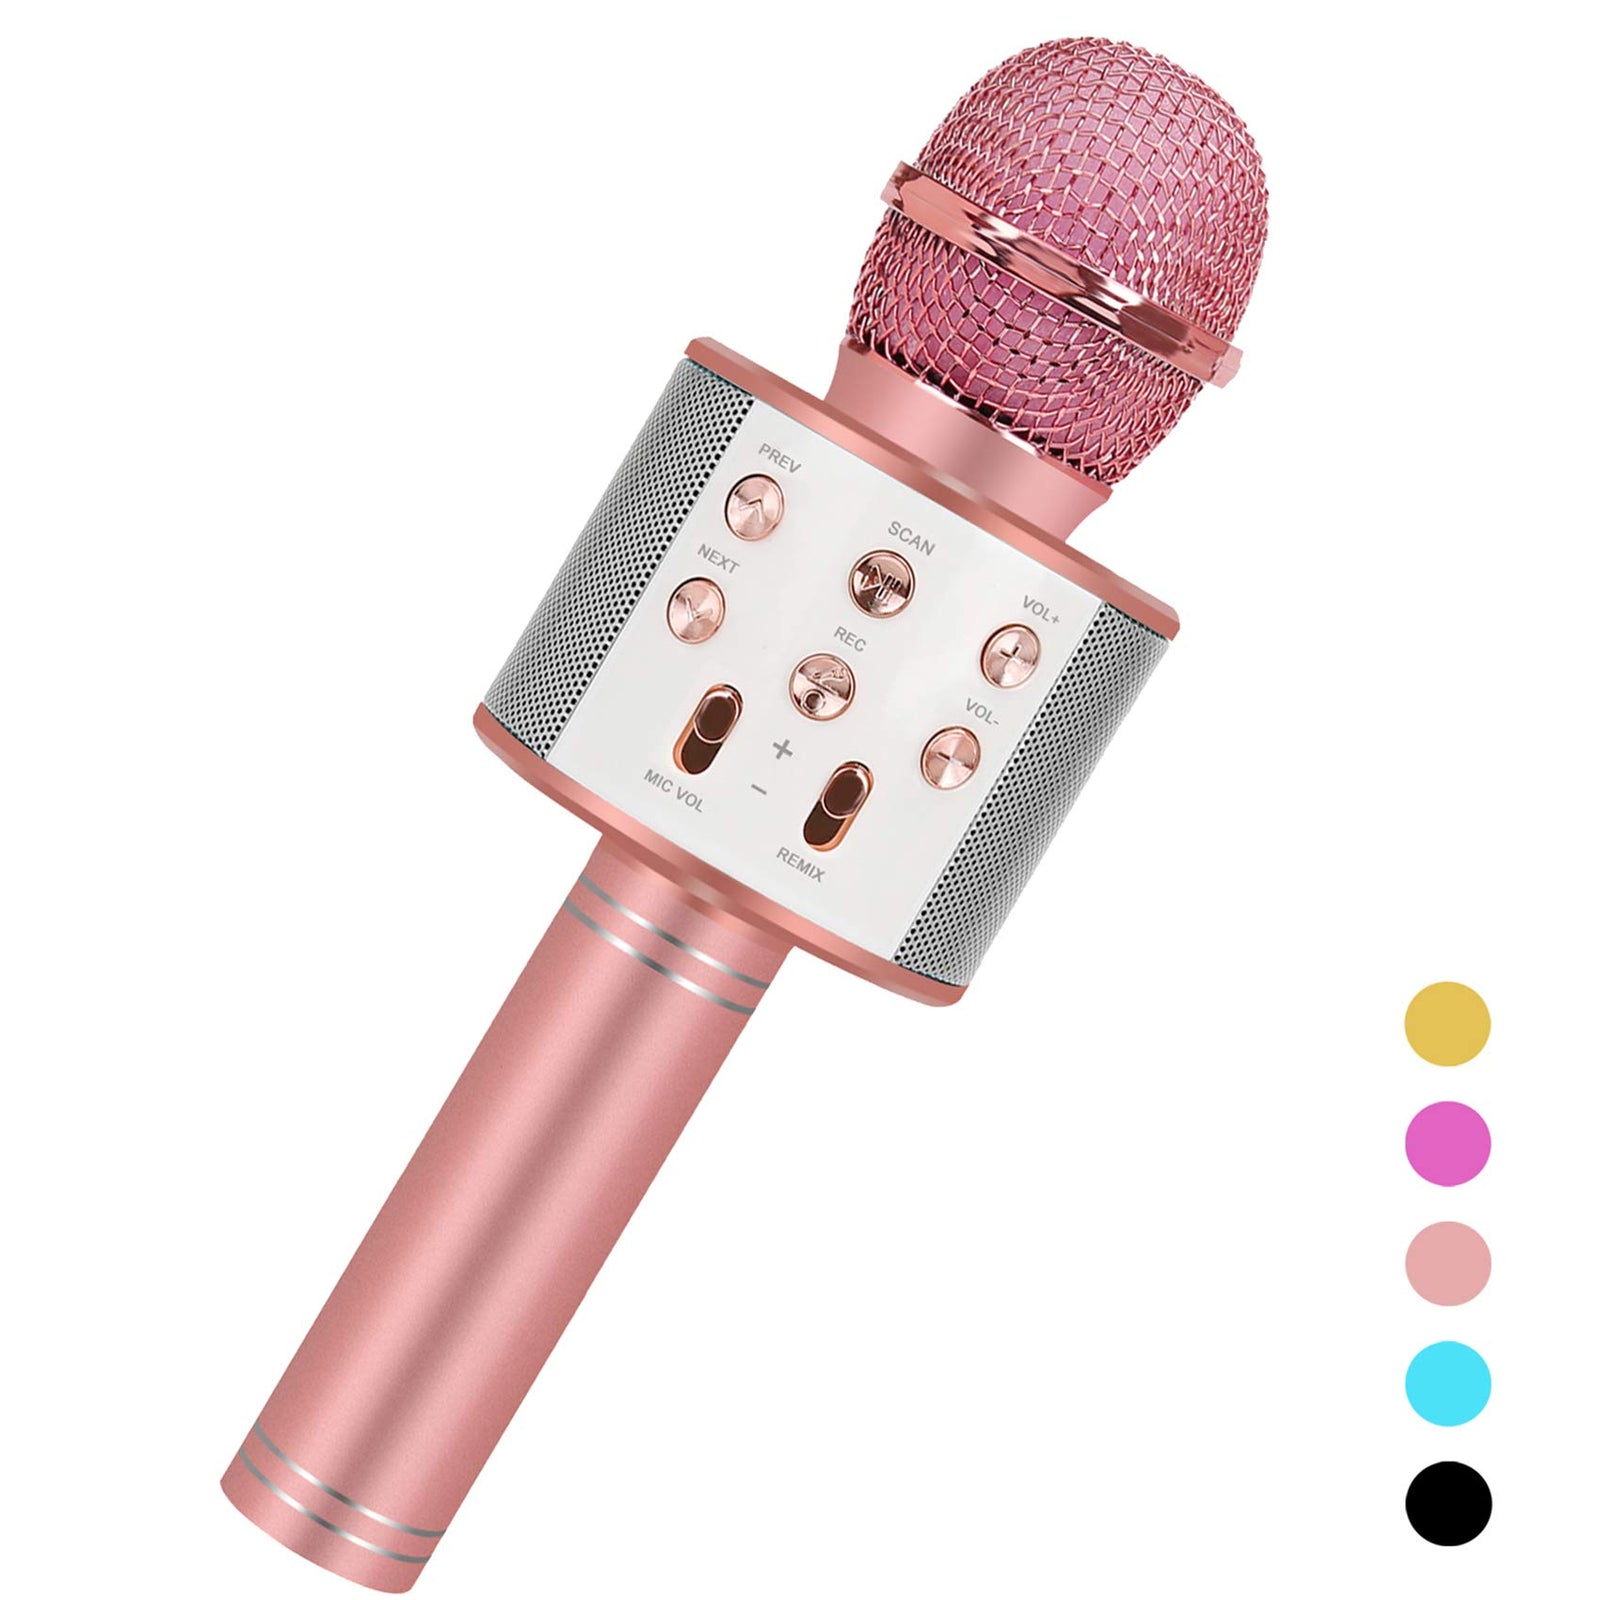 Niskite Toys for 7 8 9 10 Years Old Girls,Christmas Stocking Stuffers Birthday Gifts for 6-15 Years Old Girl Boy,Bluetooth Wireless Karaoke Microphone, Party Favor for Teen Boys Girls Toys Age 4-12